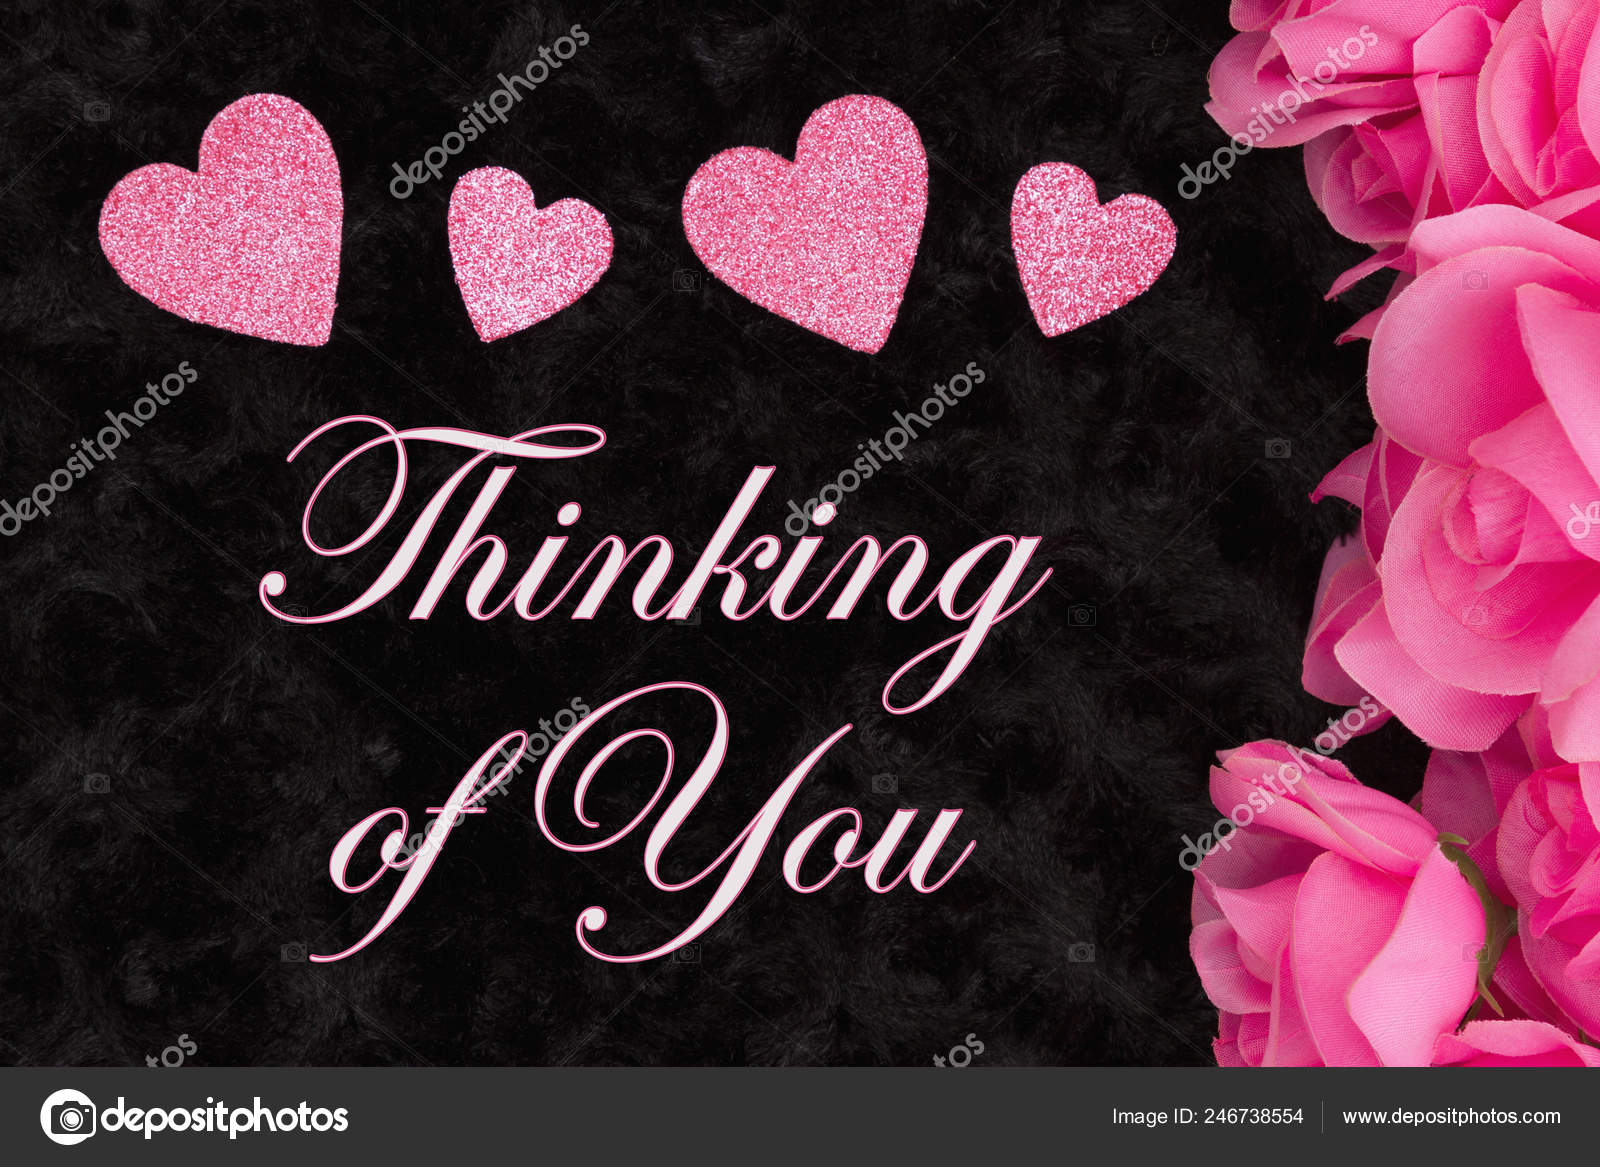 Textured Floral Petal Pink Thinking of You Card